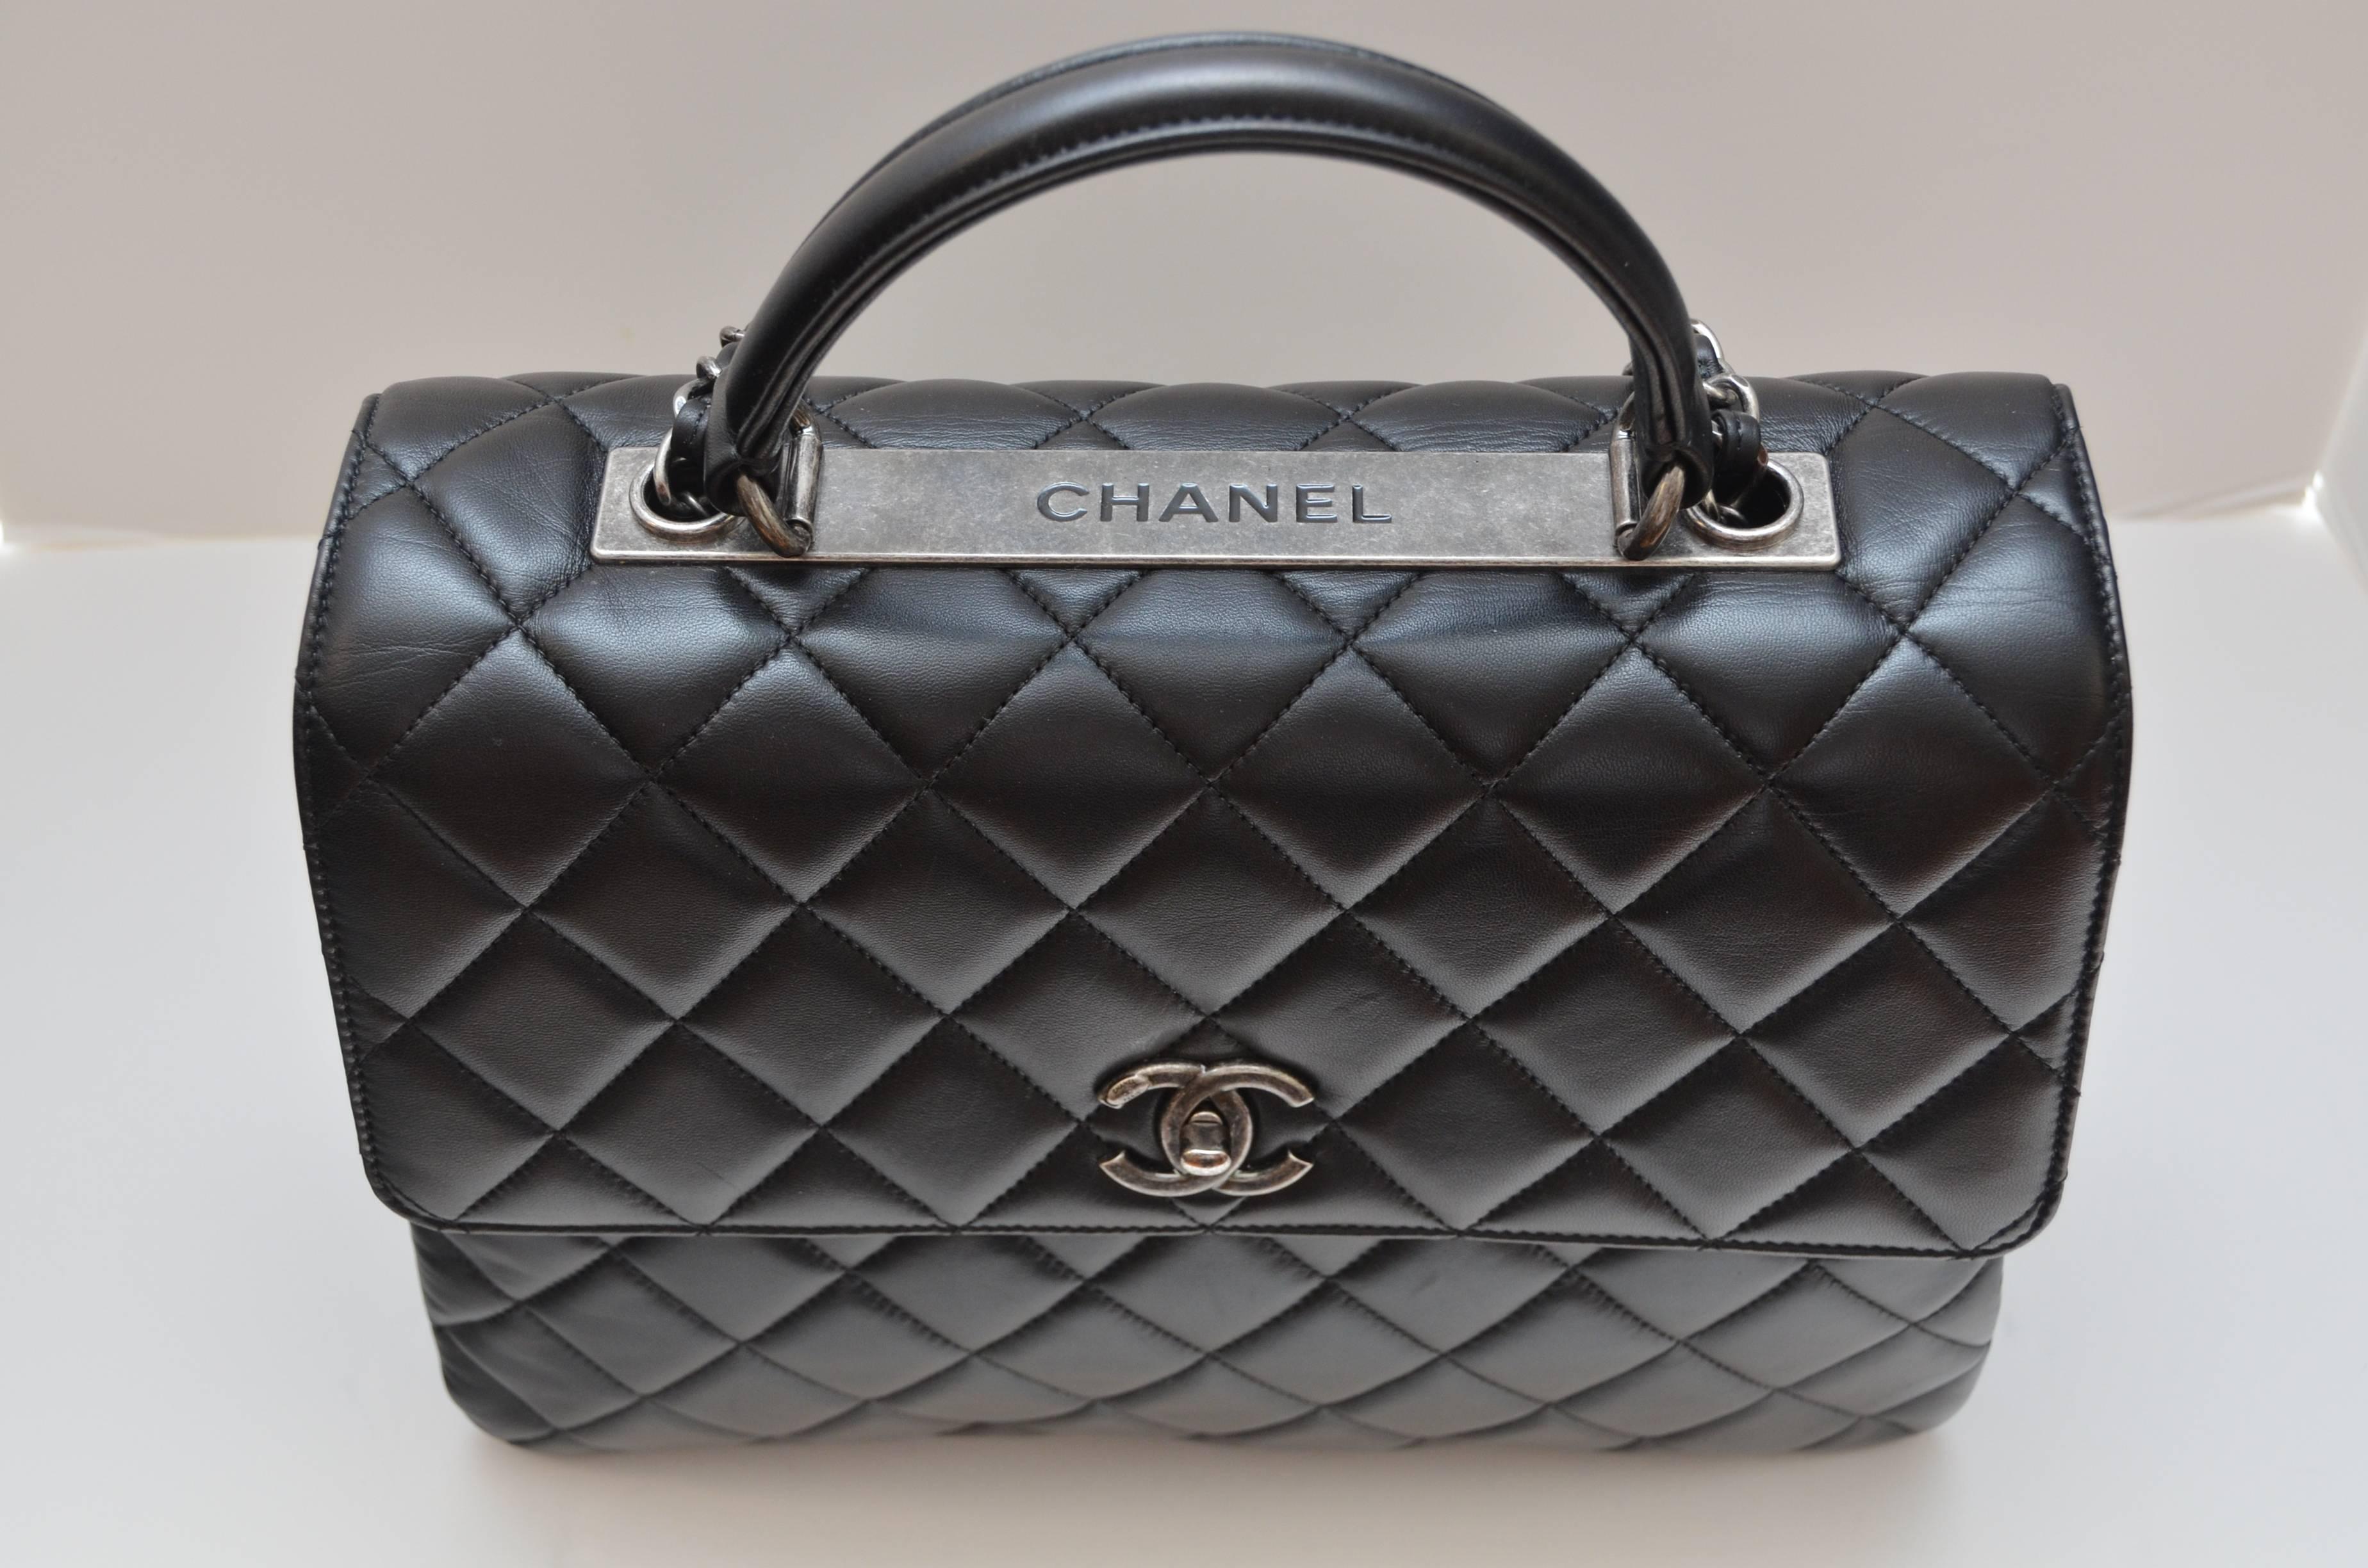 Chanel Black Large Trendy CC Classic Handle Shoulder Flap Tote Bag retailed for $7,000 USD plus tax in stores .
Ornate, stylish and practical at the same time, the bag features Chanel's classic soft lambskin quilting, the classic turnlock CC